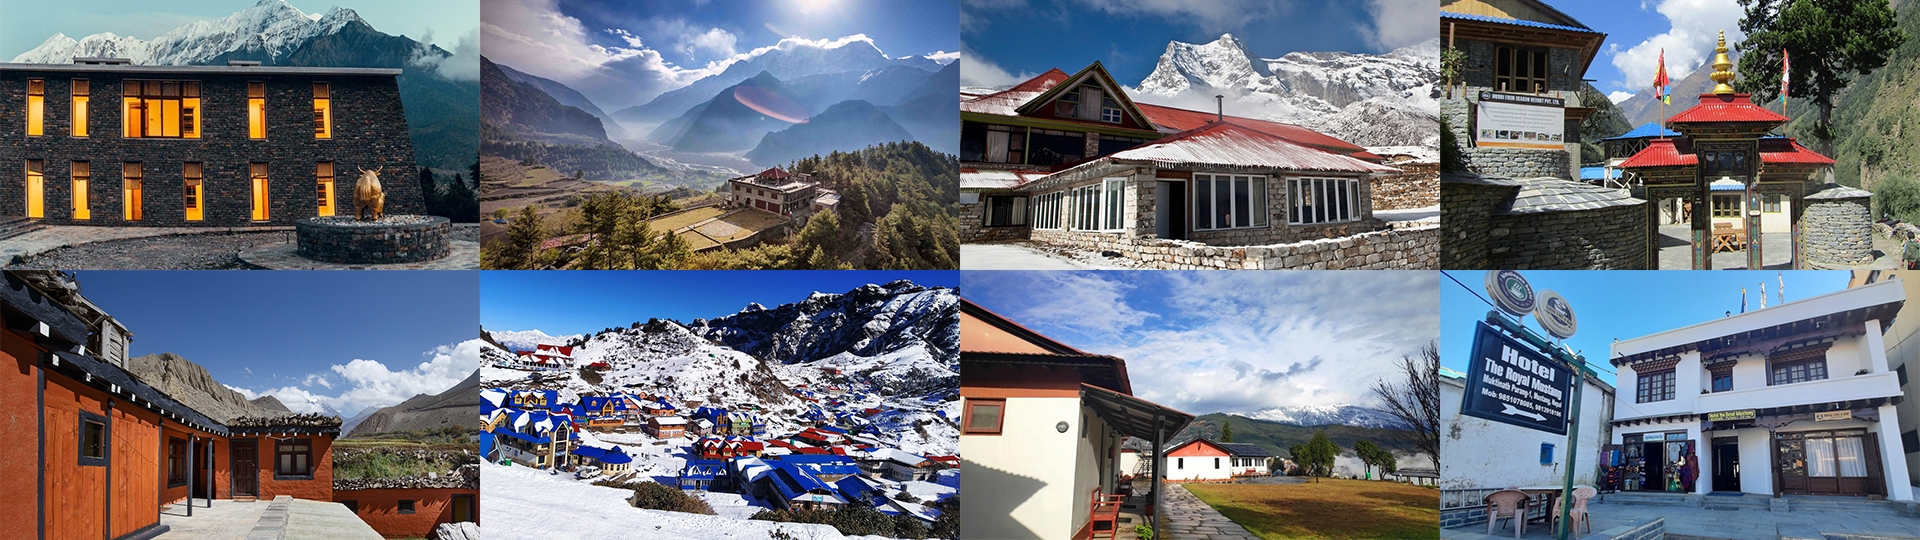 Top 10 Luxury Hotels and Resorts in the Himalayas of Nepal